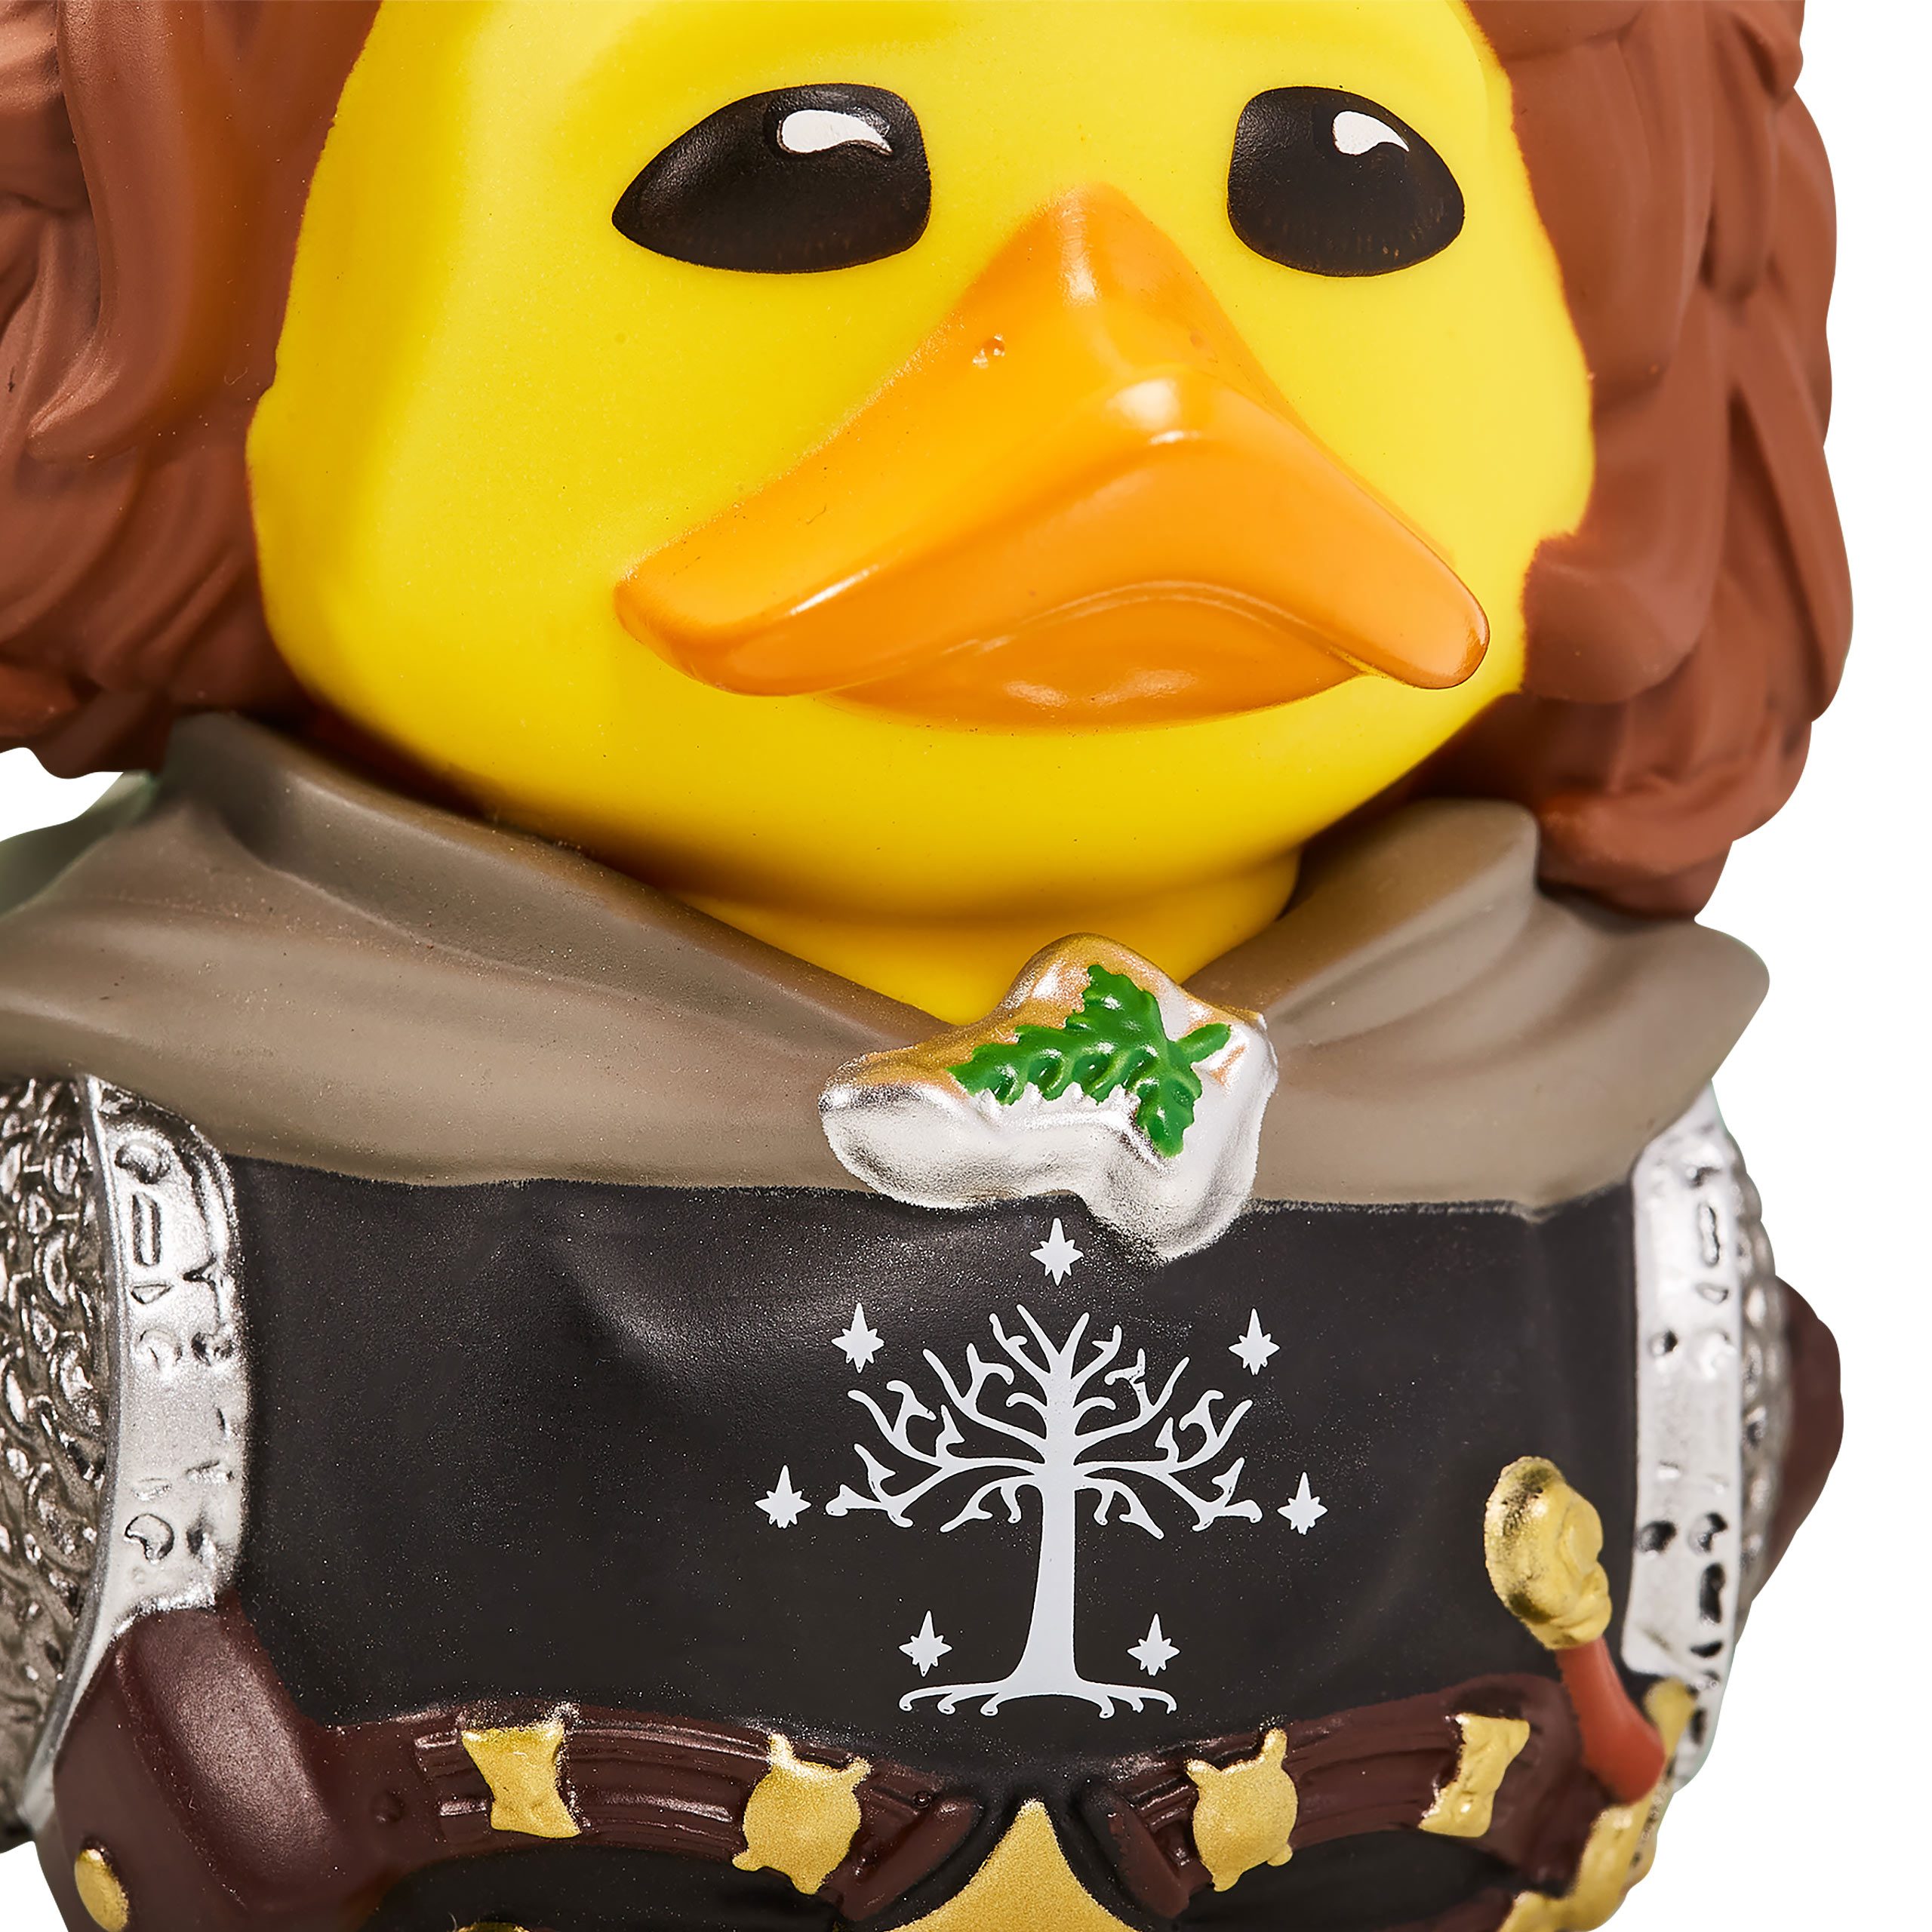 Lord of the Rings - Pippin Took TUBBZ Decorative Duck